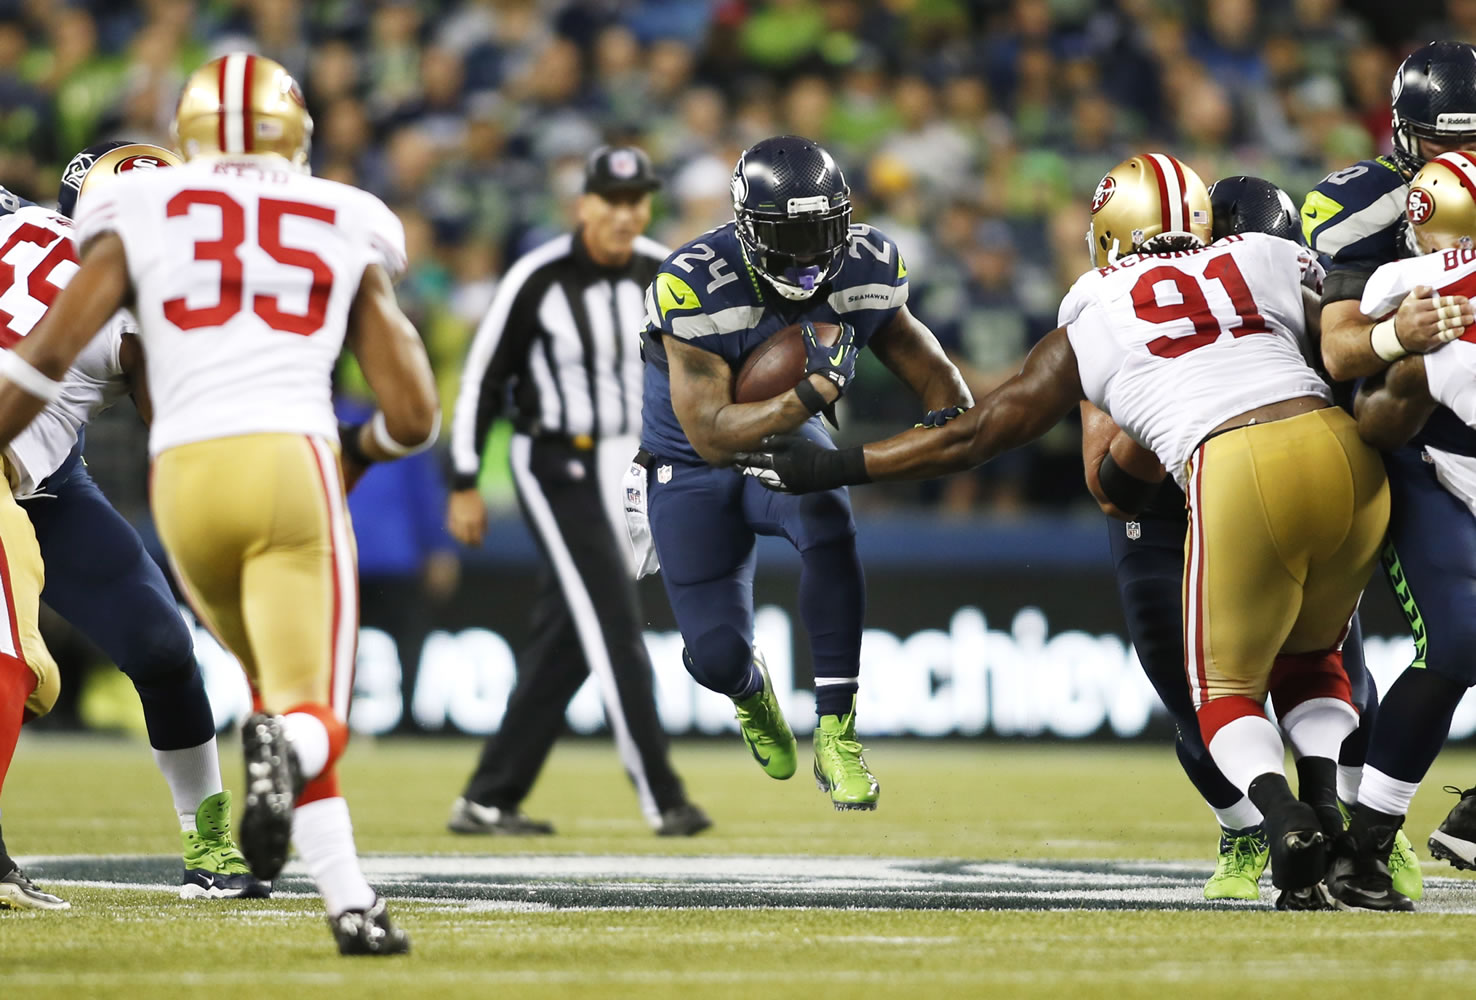 Seattle Seahawks' running back Marshawn Lynch (24) leaps as he carries the ball against San Francisco 49ers' Eric Reid (35) and Ray McDonald (91) in the first half of an NFL football game, Sunday, Sept. 15, 2013, in Seattle.